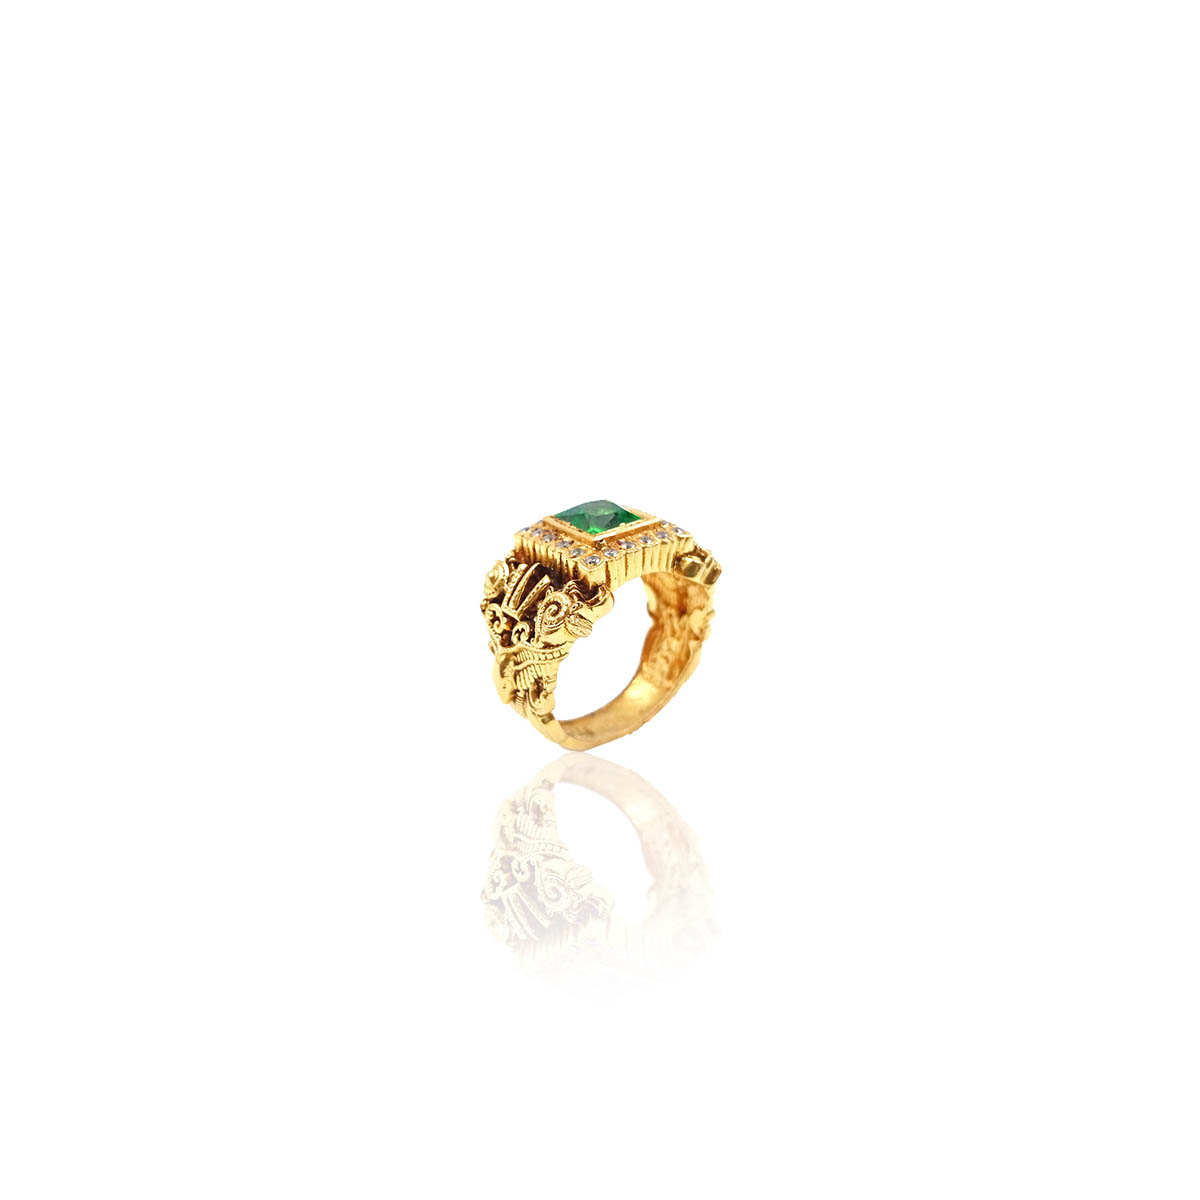 Antique Ring - Sanjay Jewellers